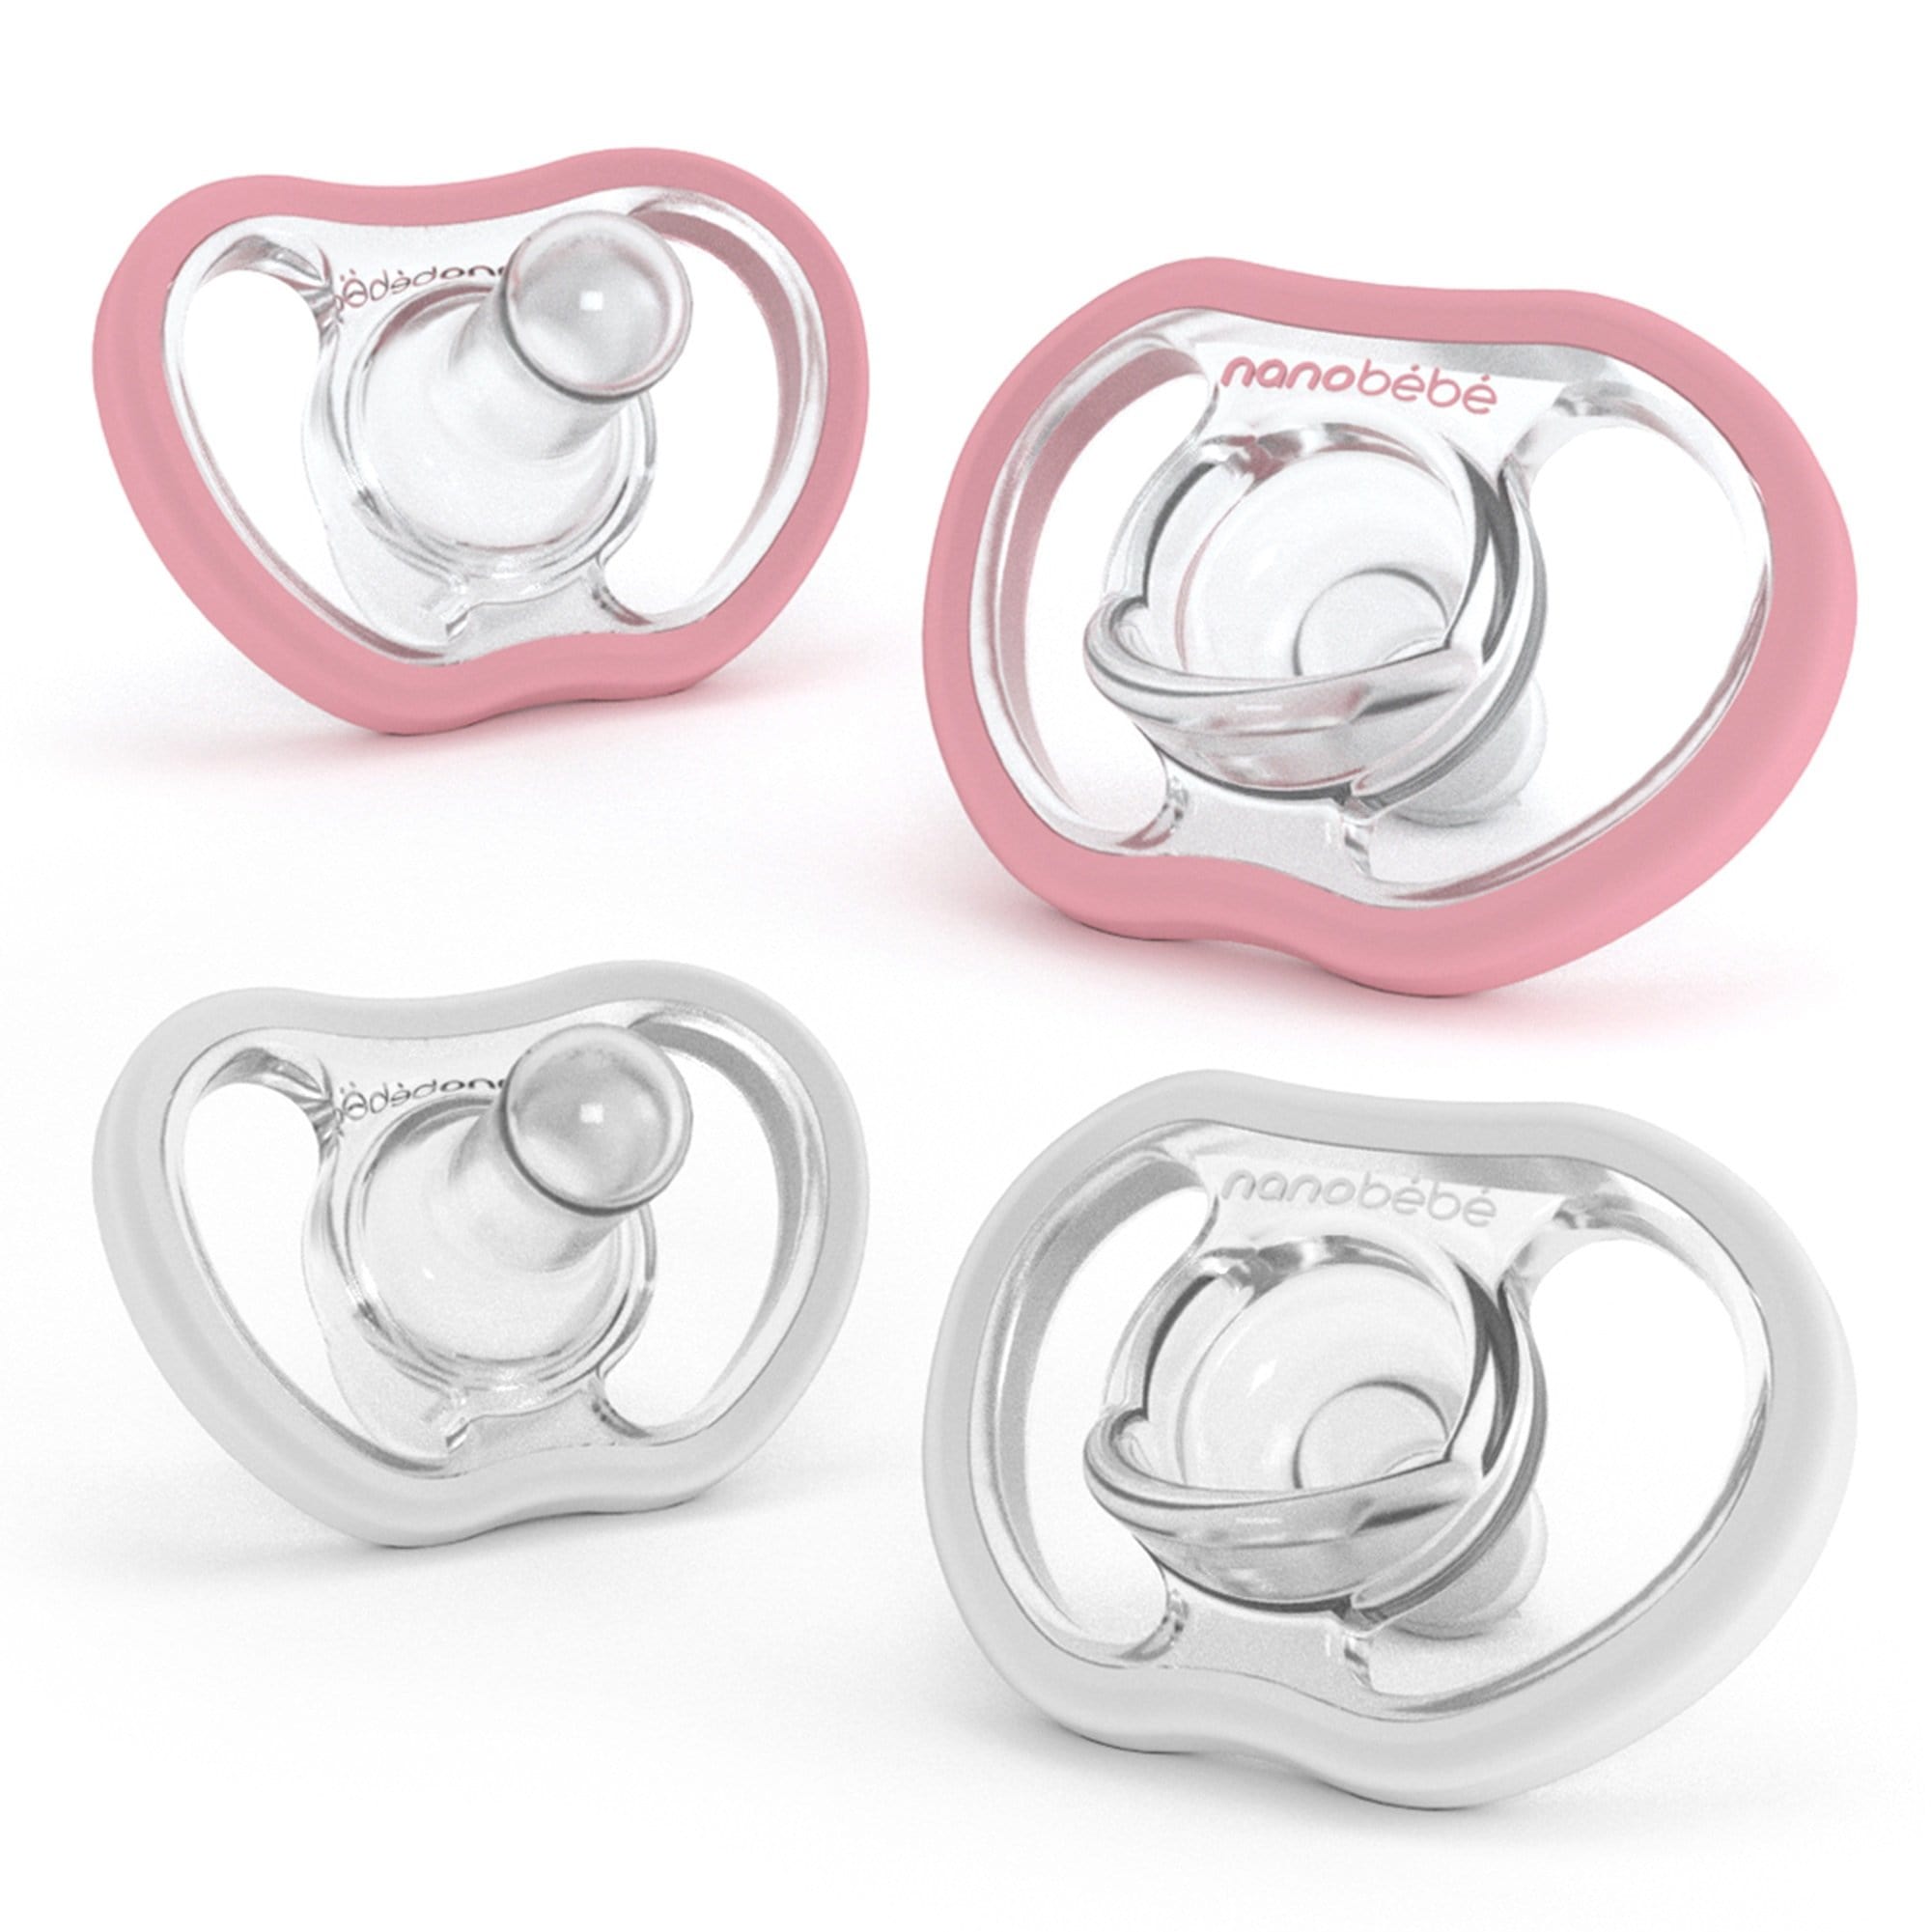 https://cdn.shopify.com/s/files/1/0268/9581/0602/products/Nanobebe_RTL_Pacifier-Active_01Pink_White_4-Pack.jpg?v=1645727018